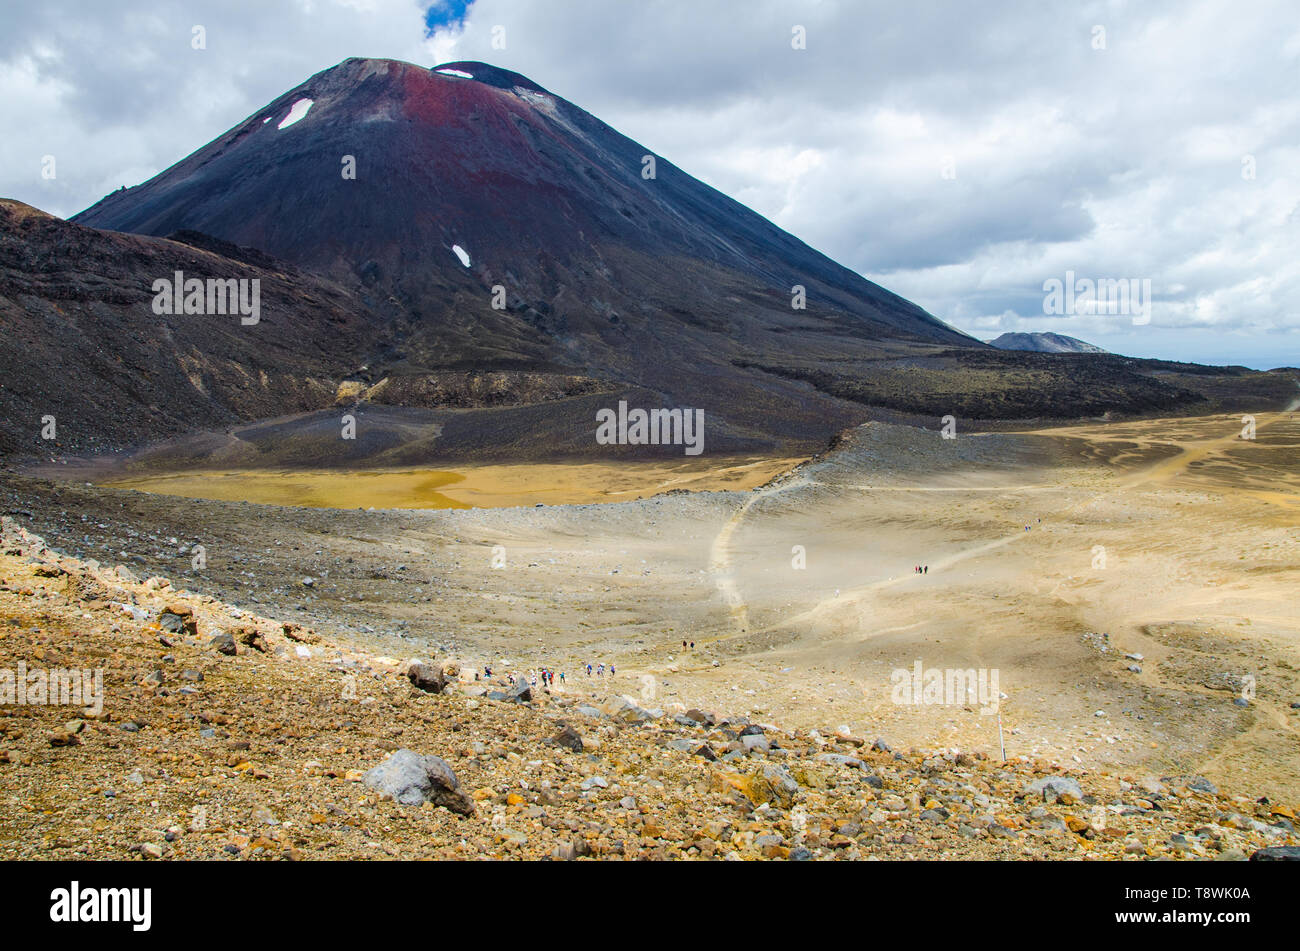 View of Mount Ngauruhoe - Mount Doom from Tongariro Alpine Crossing hike with clouds above. Stock Photo